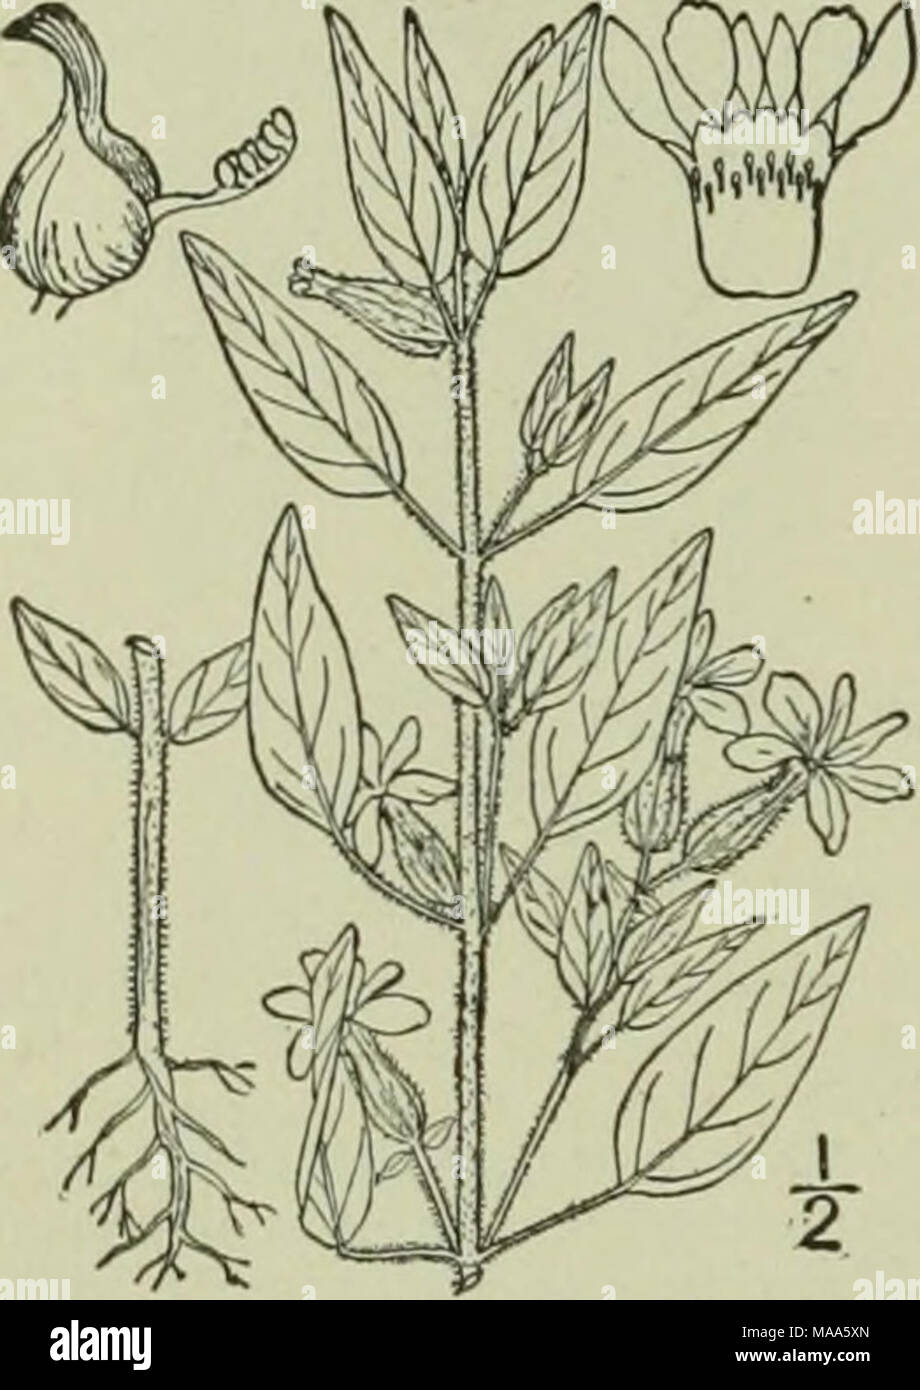 . An illustrated flora of the northern United States, Canada and the British possessions : from Newfoundland to the parallel of the southern boundary of Virginia and from the Atlantic Ocean westward to the 102nd meridian . of the eastern United States and Cuba. Type species: Rhe I. R. marian â glabrous. Stem more or less pubescent: leaves ovate. Stem glabrous. Leaves oblong c lance-oblong: calyx with a fe Leaves ovate, bristly-ciliate ; calyx glabrous. 2. R. virginii hairs above. Stock Photo